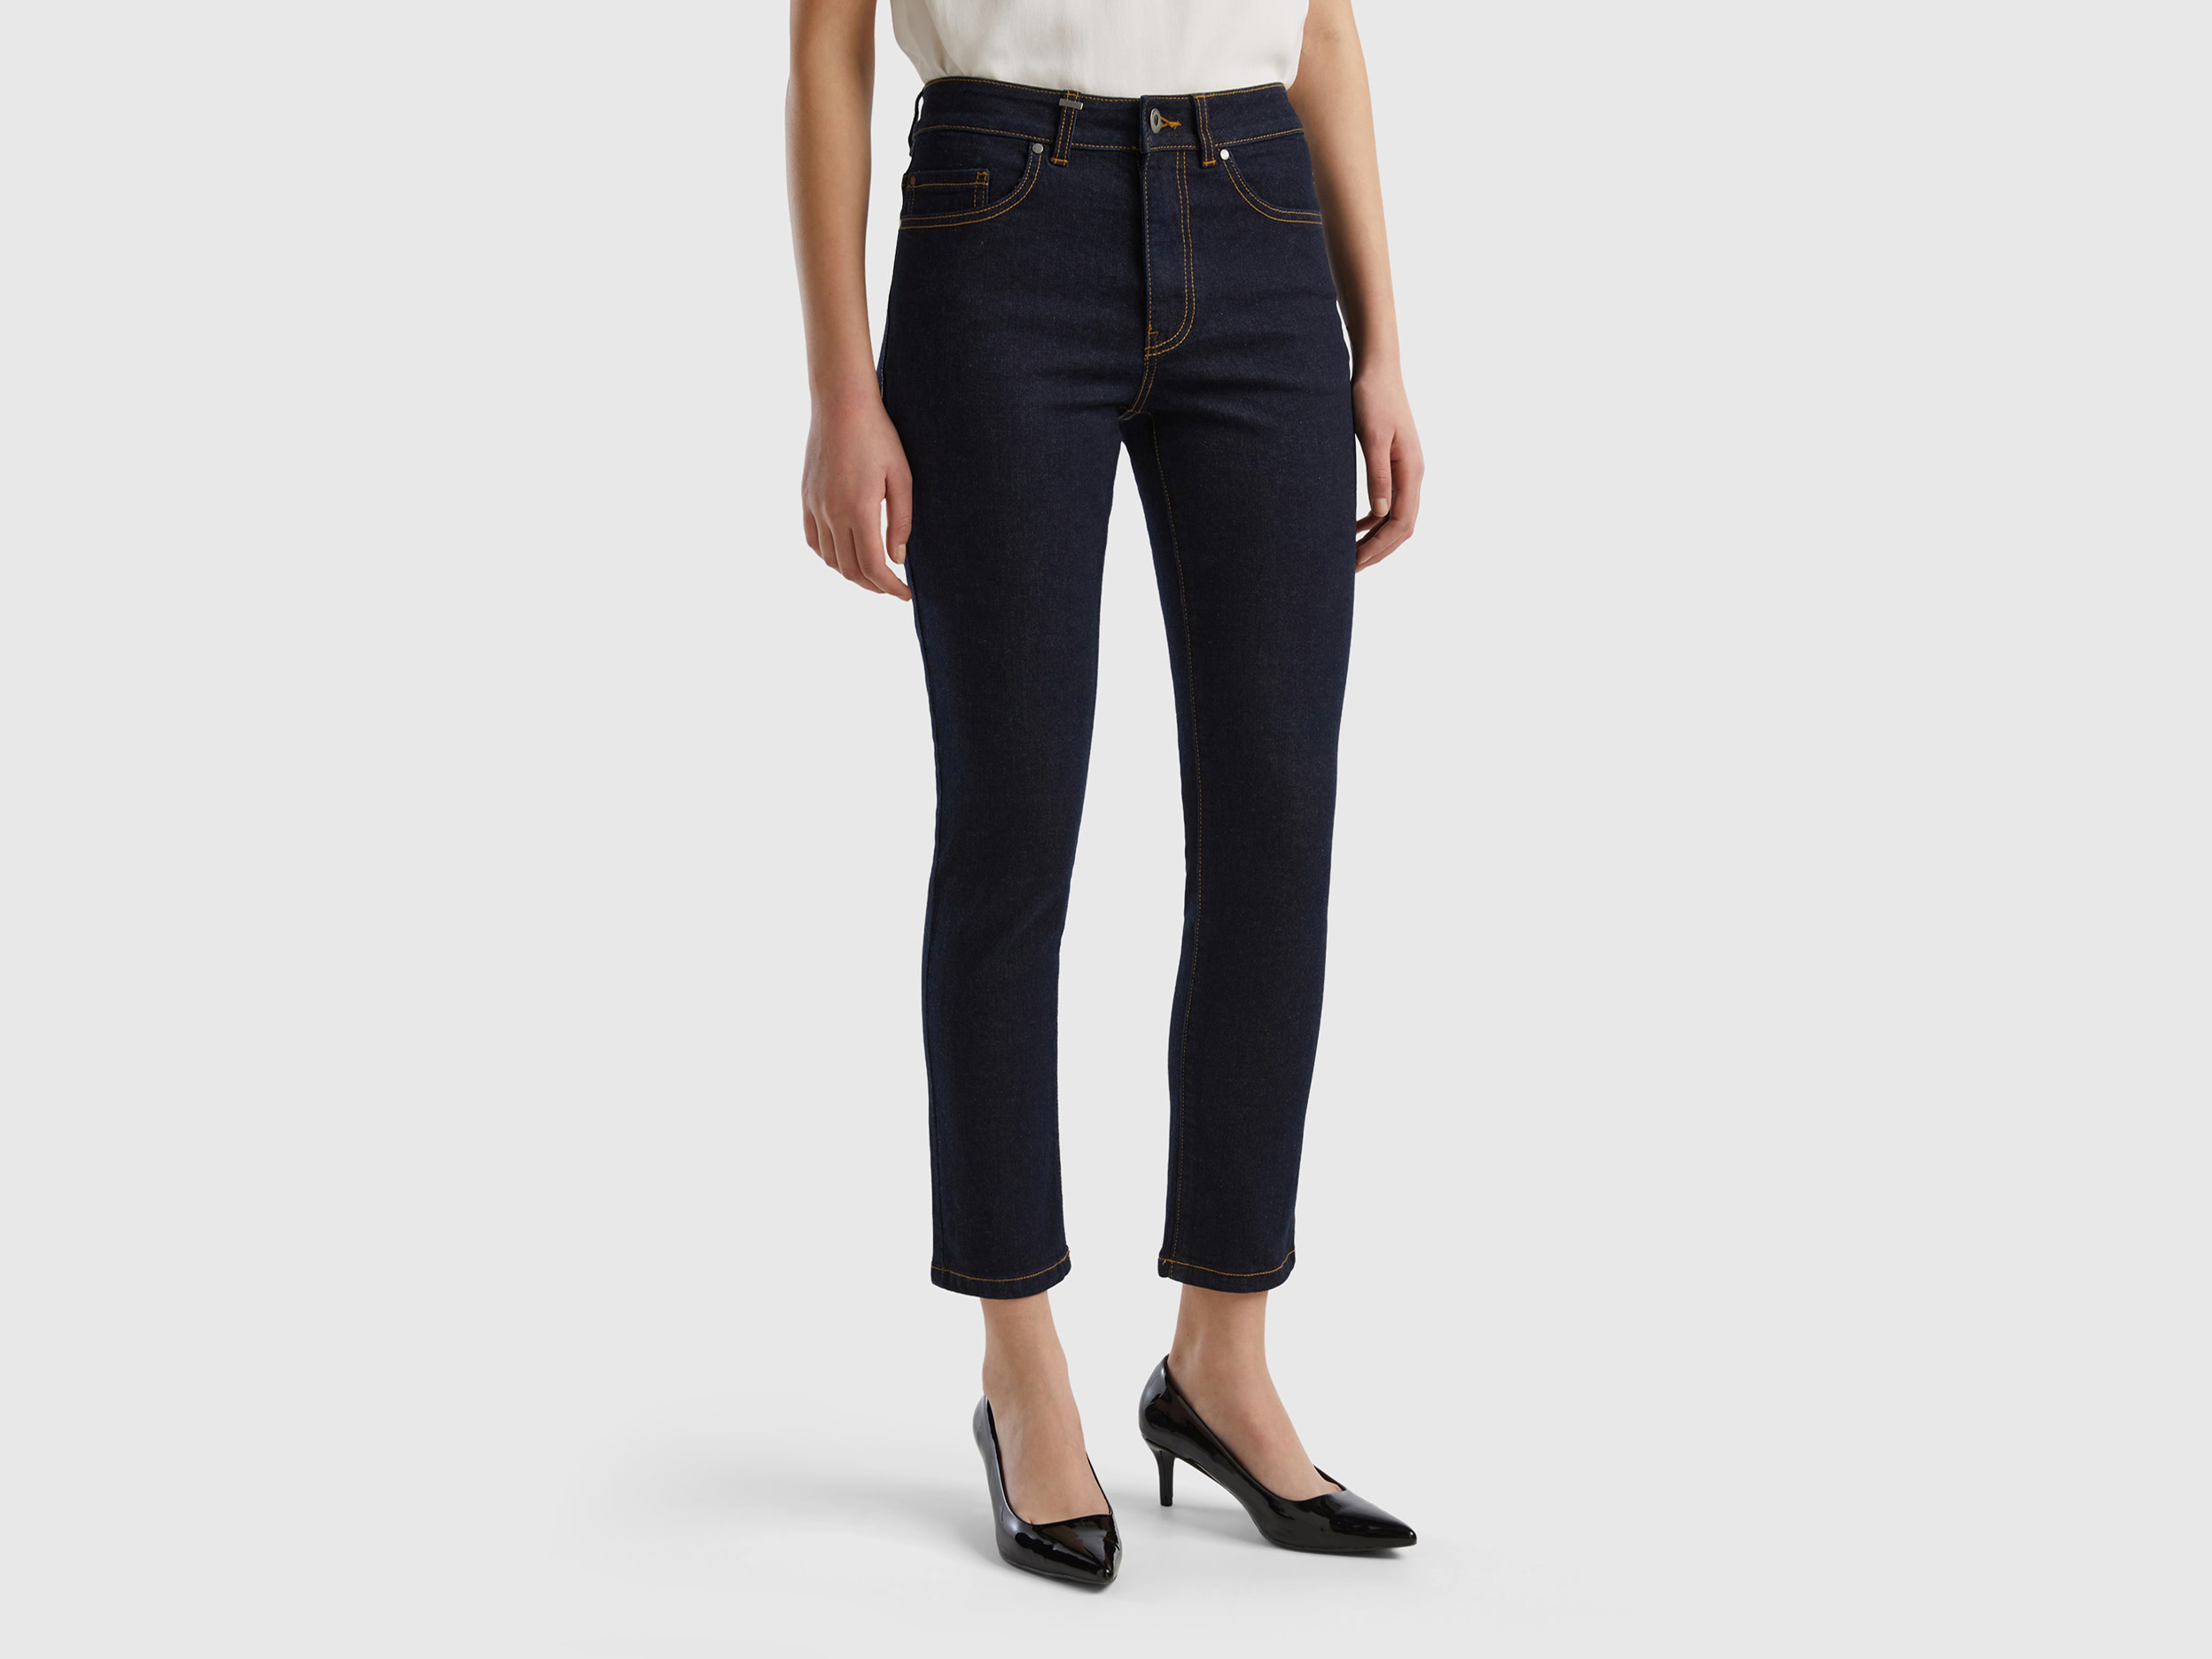 Image of Benetton, Slim Fit High-waisted Jeans, size 30, Dark Blue, Women